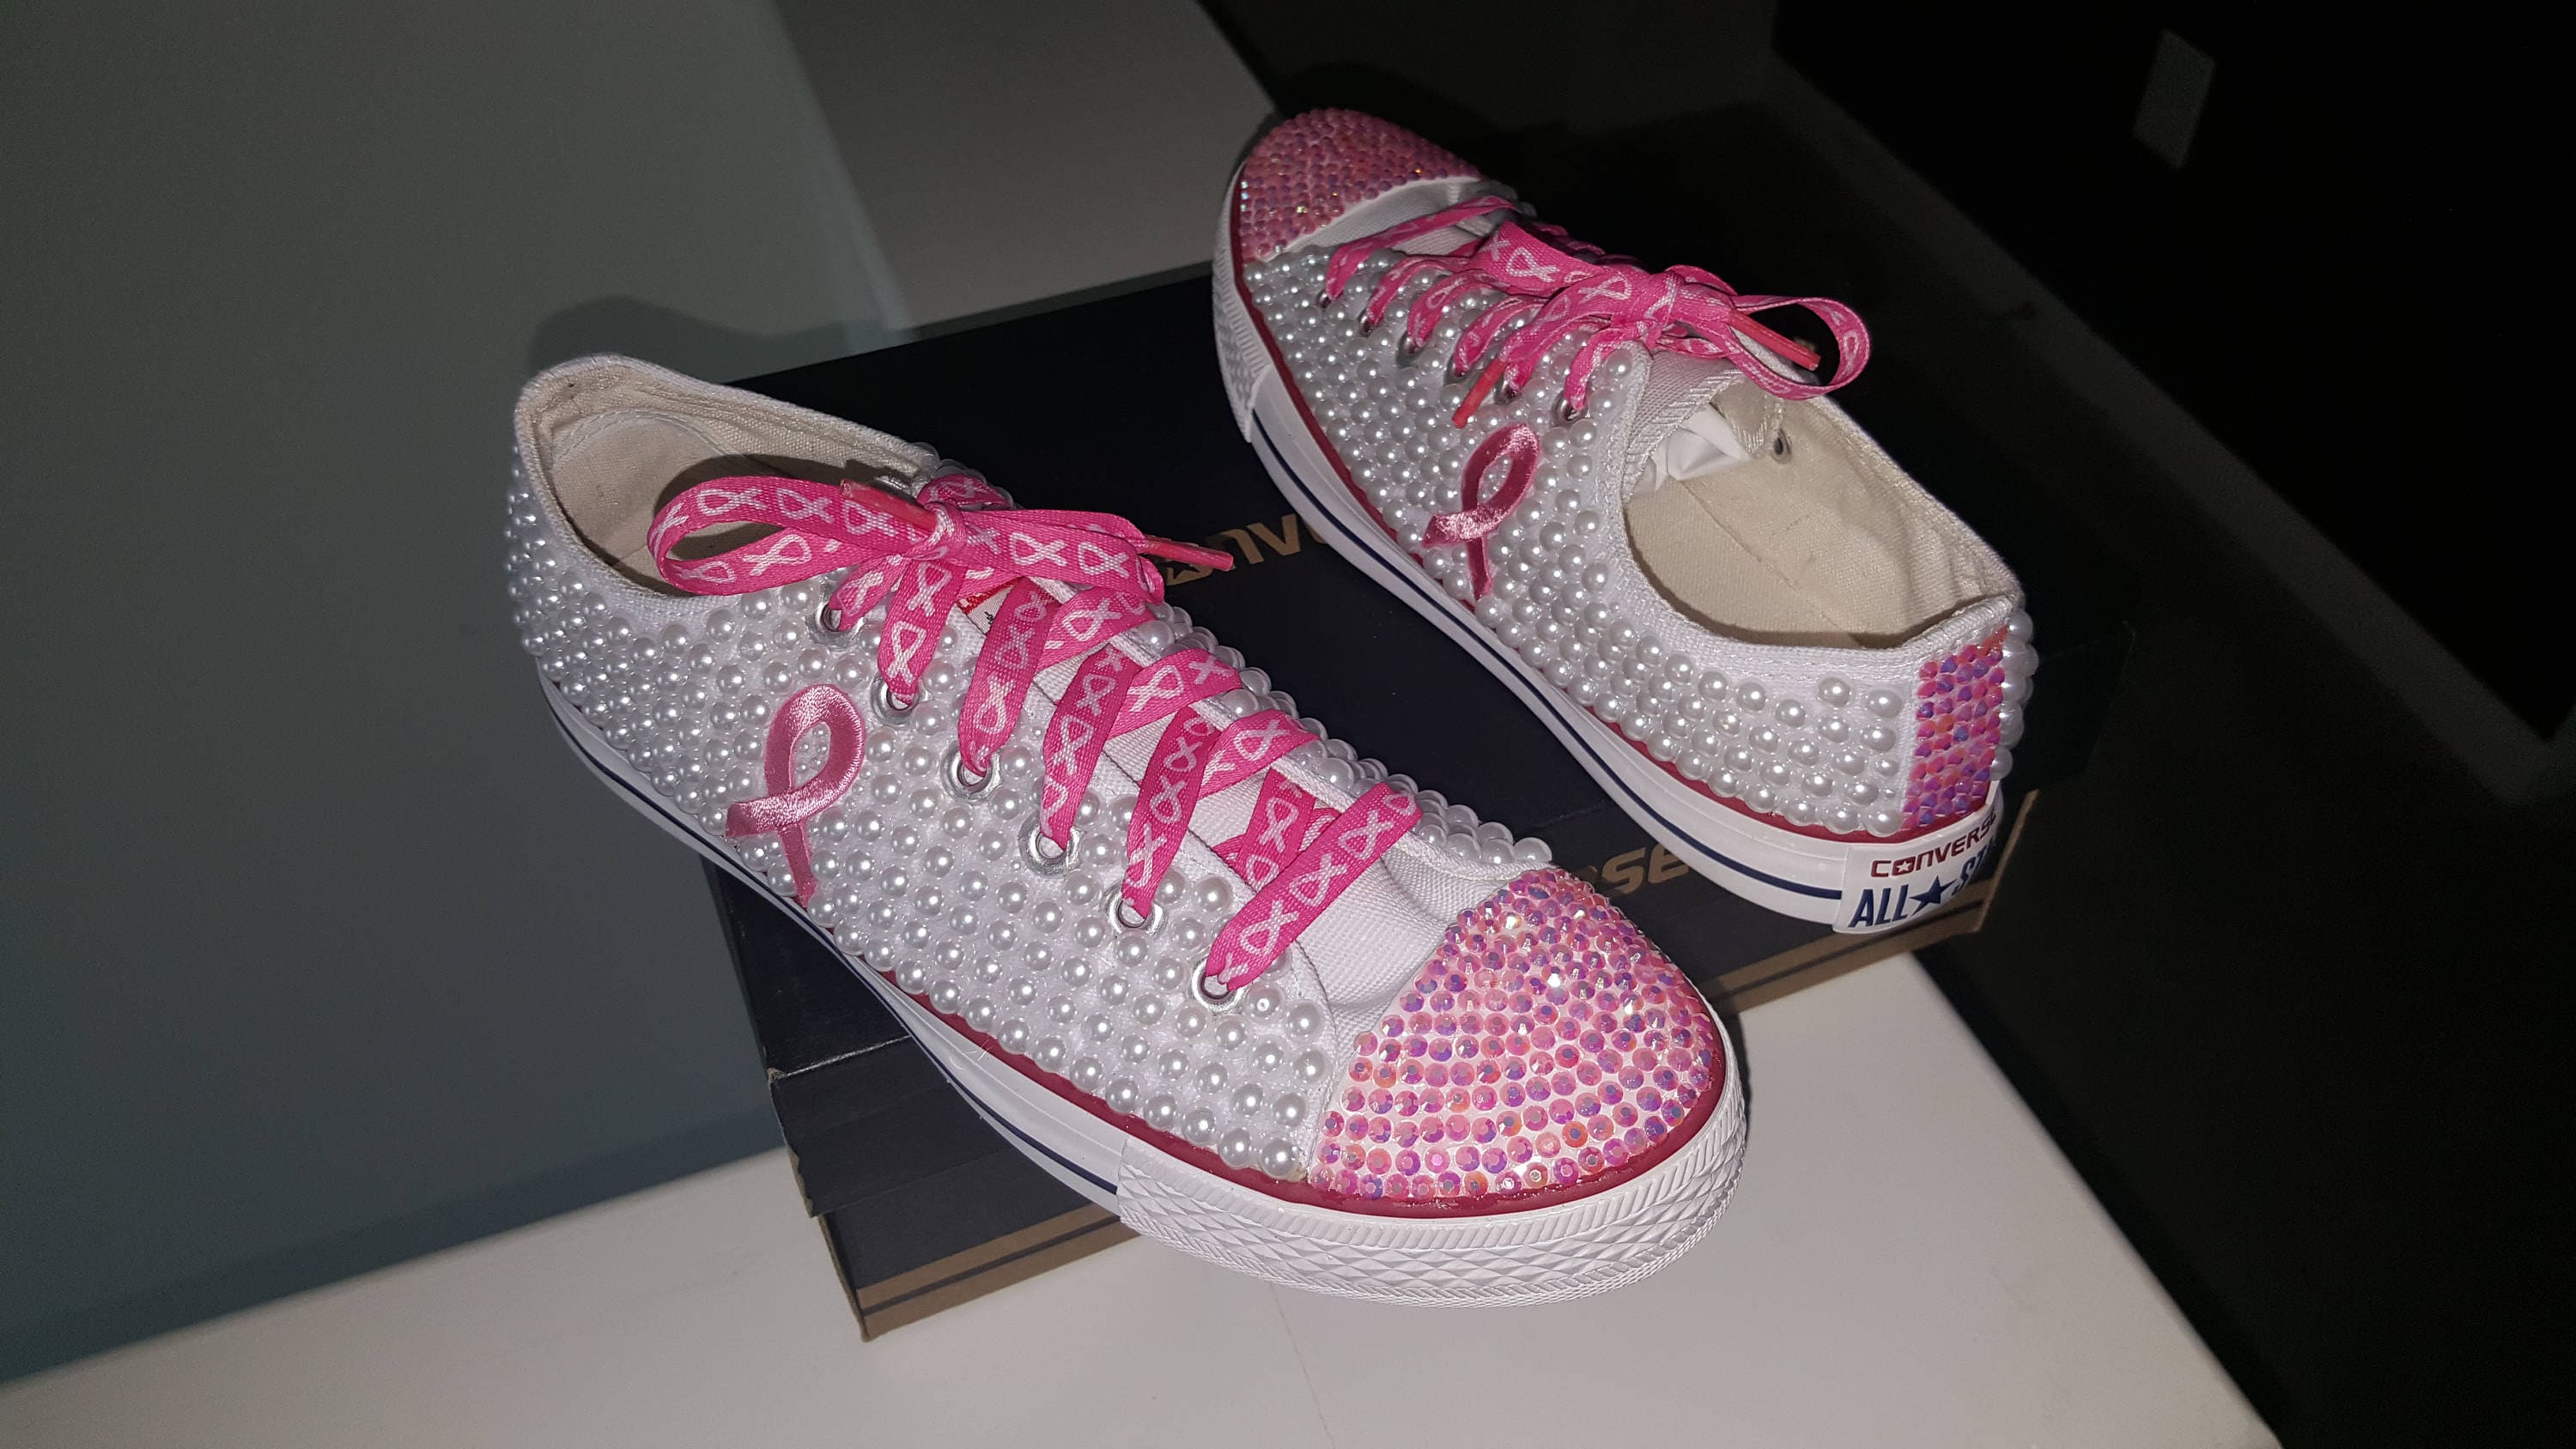 Breast Cancer Awareness - Hope Converse Low Tops – www.